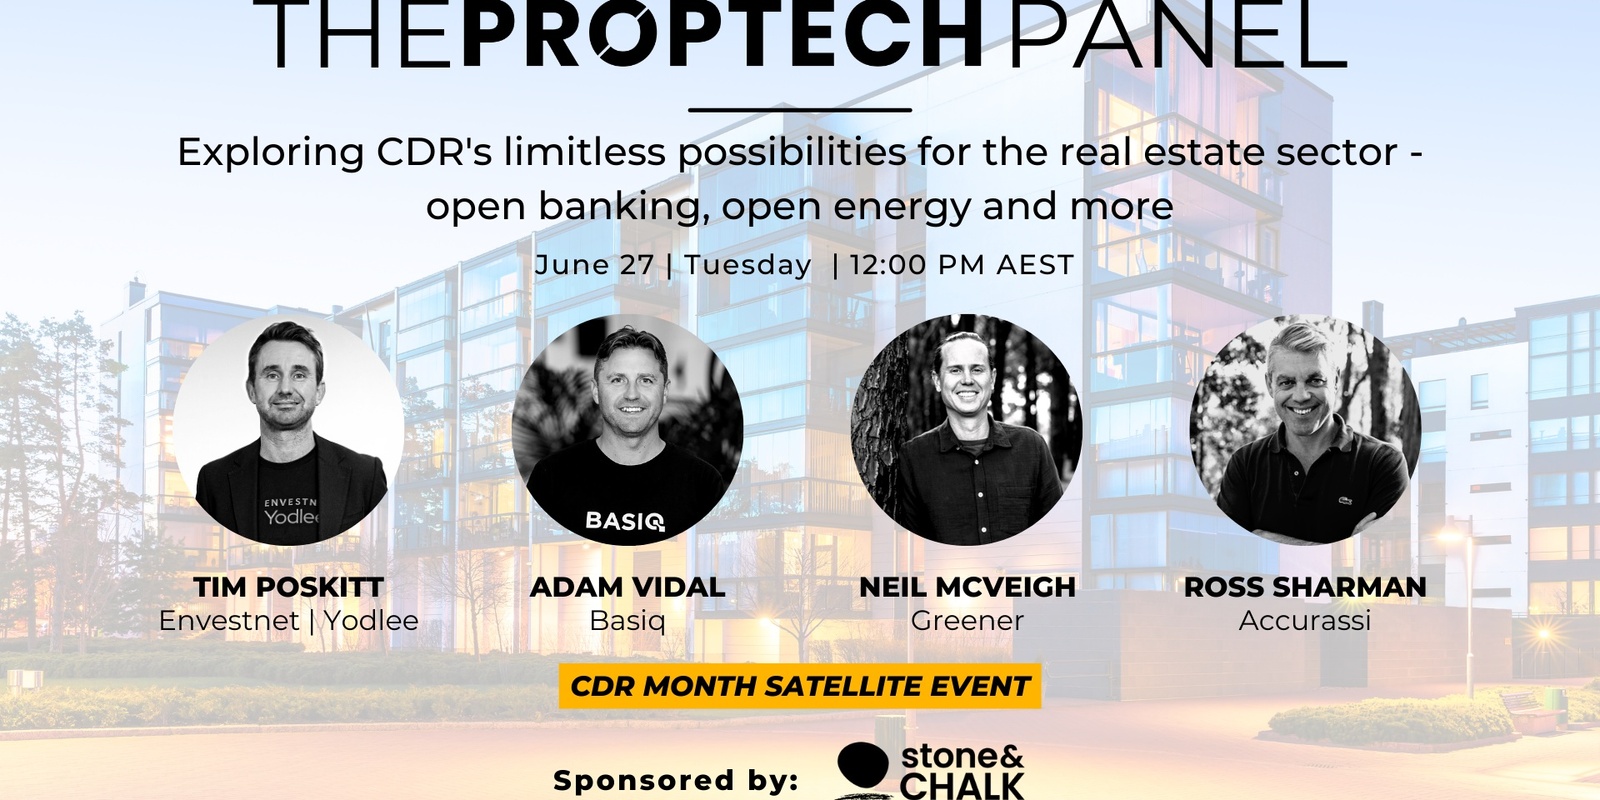 The Proptech Panel:  Exploring CDR's Limitless Possibilities for the Real Estate Sector